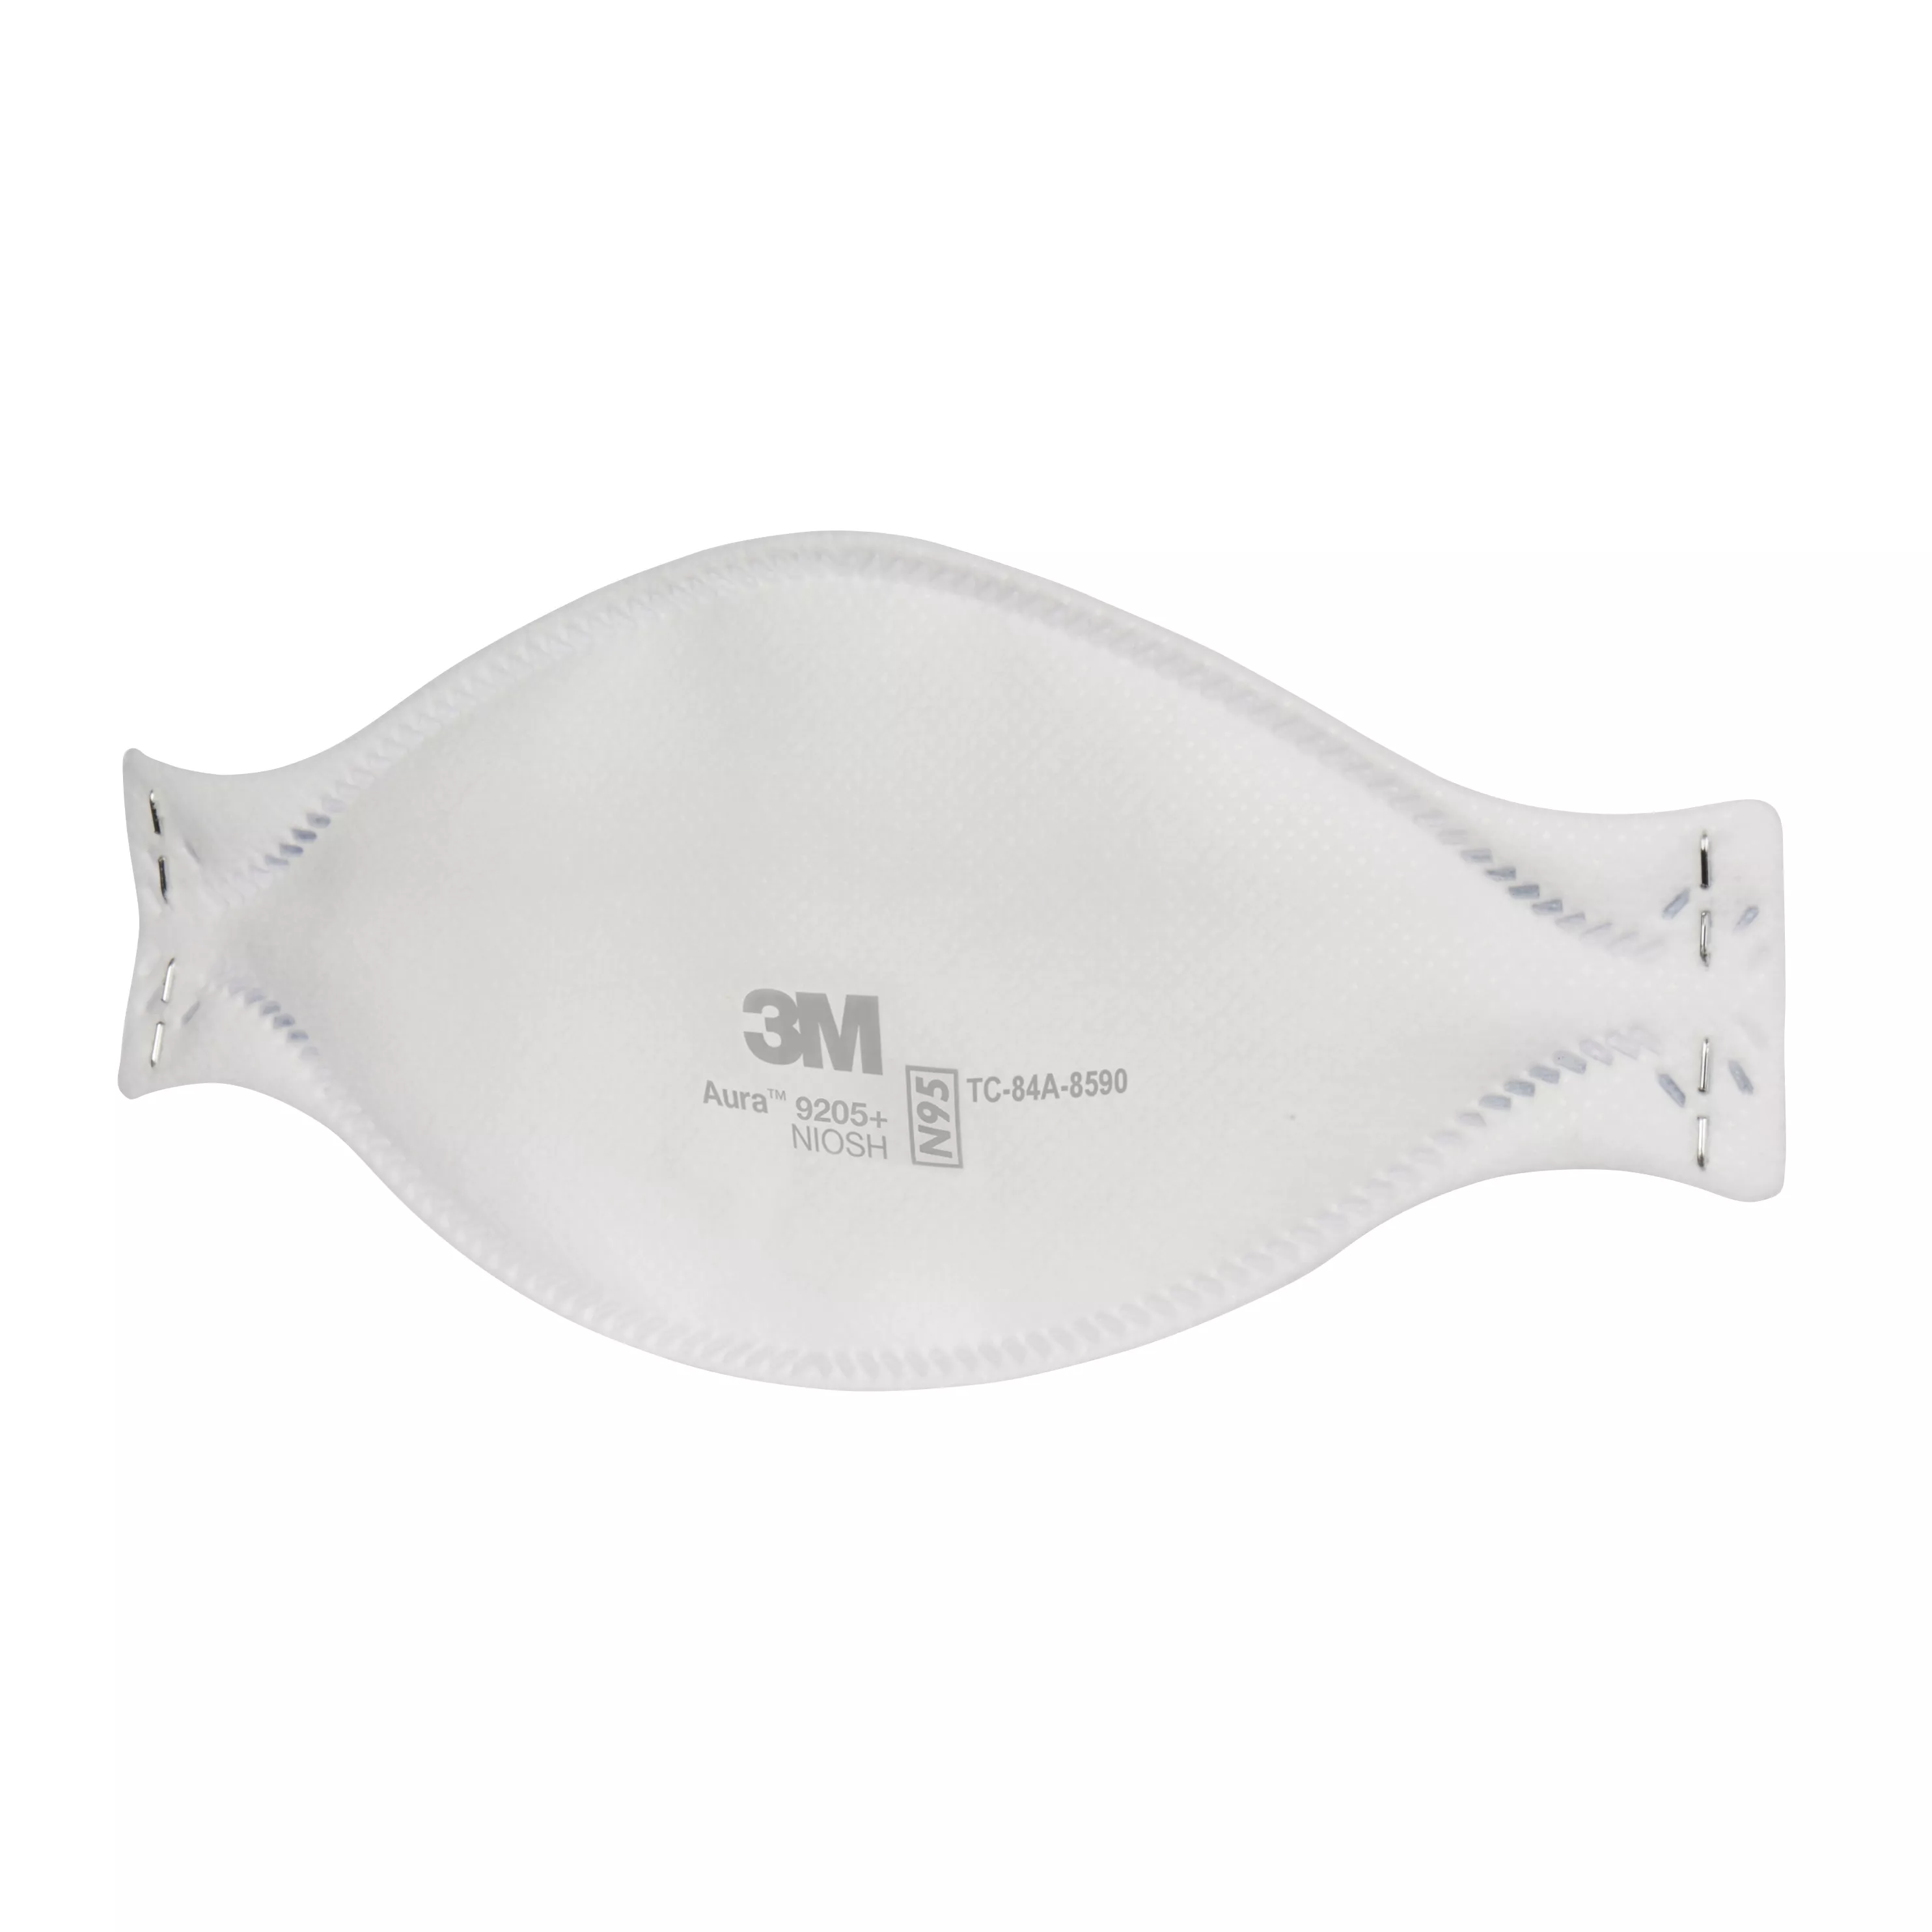 Product Number 9205+ | 3M™ Aura™ Particulate Respirator 9205+